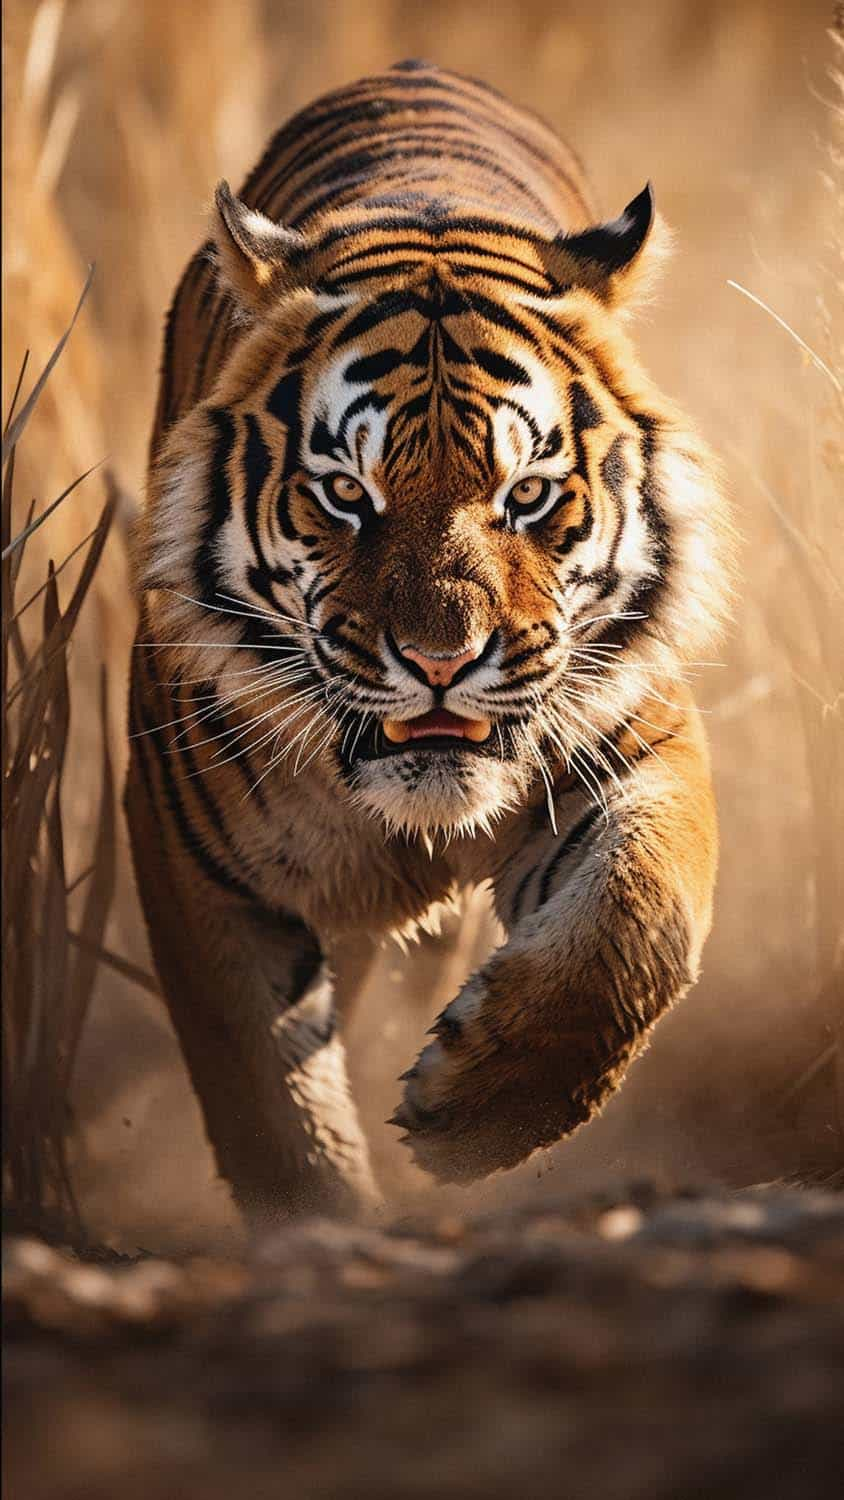 Tiger Emerald  Apps on Galaxy Store  Tiger pictures Tiger wallpaper  Tiger images